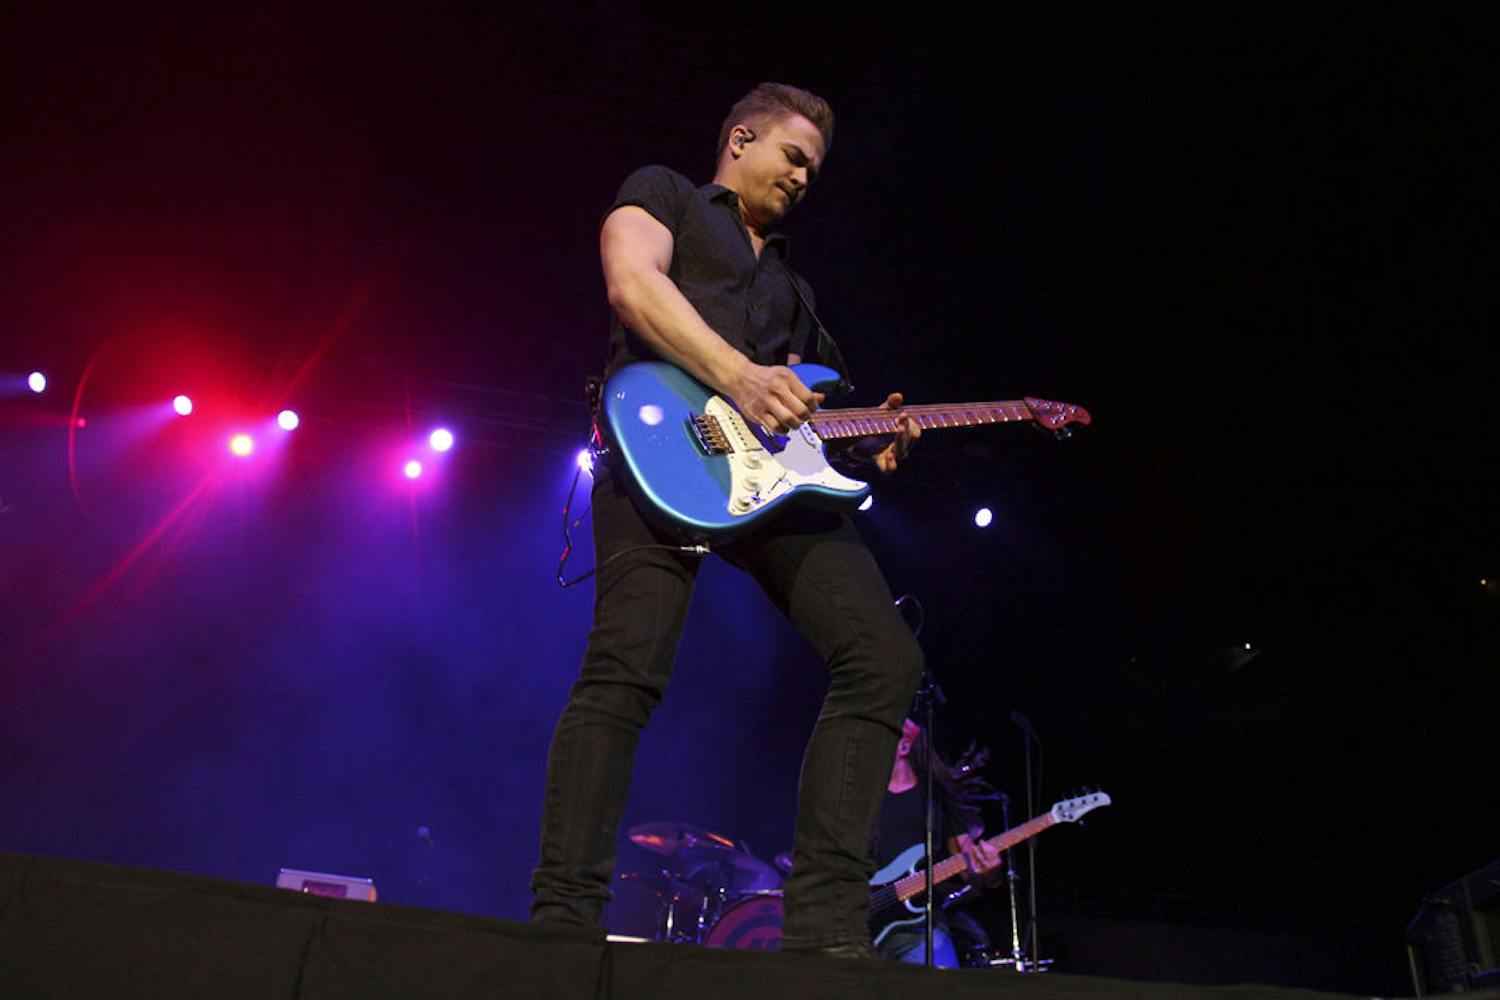 Hunter Hayes performs at the Stephen C. O’Connell Center on Wednesday night, opening with his song “Tattoo.”